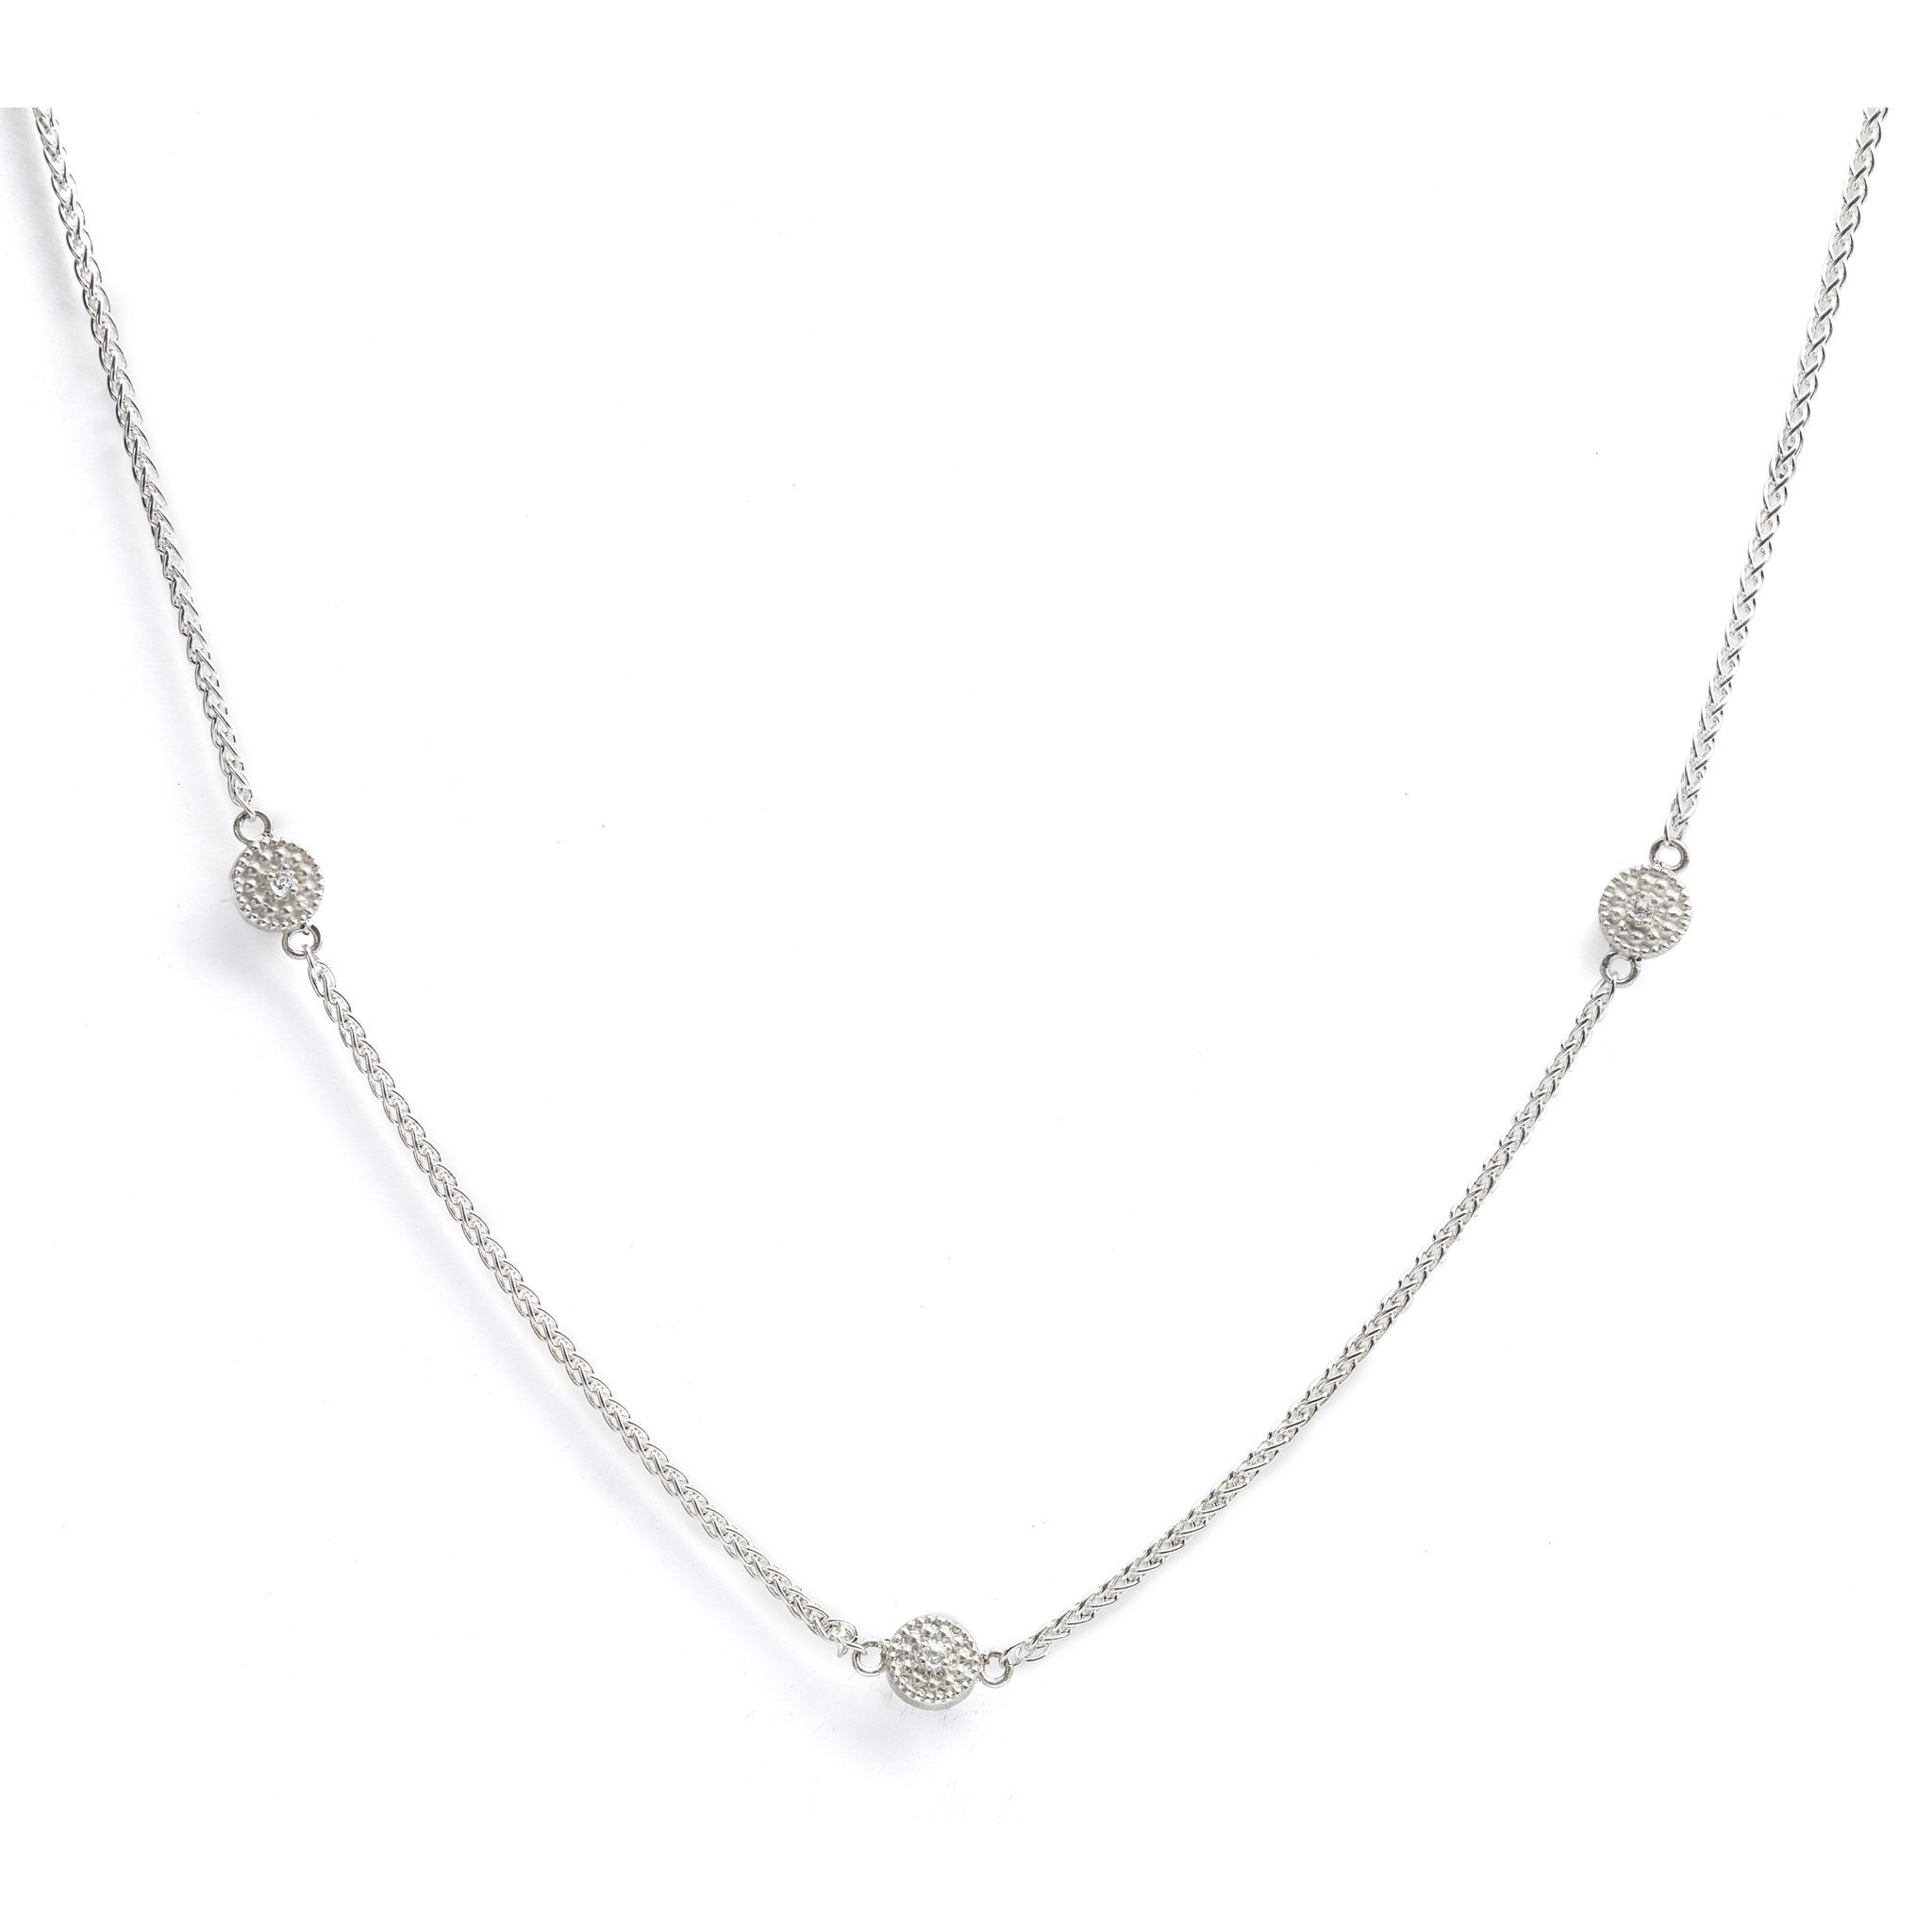 The Reverso Trio necklace in Crystal Quartz - Christelle Chamberland